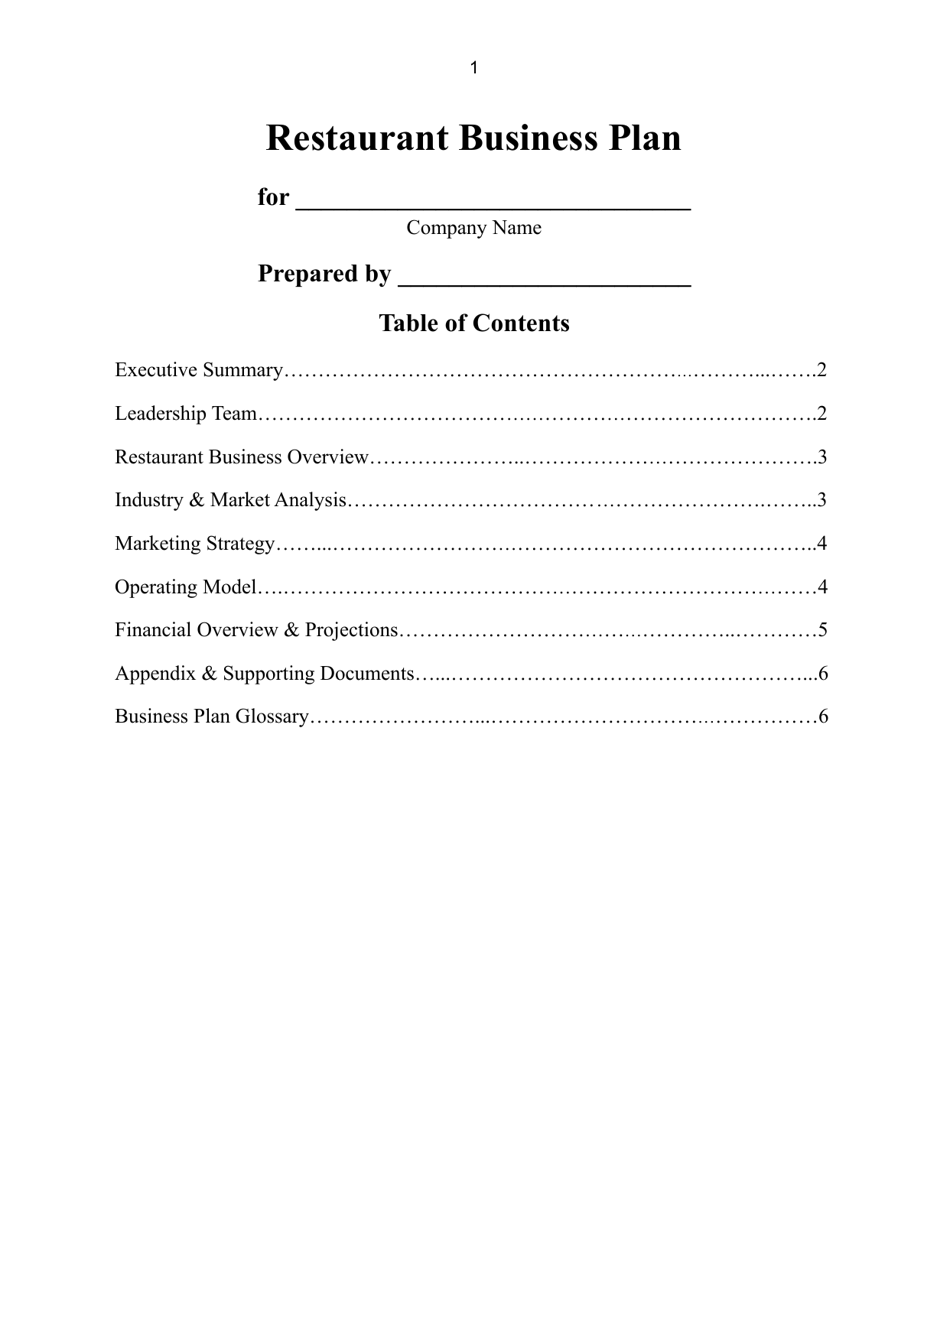 Restaurant Business Plan Template, Page 1